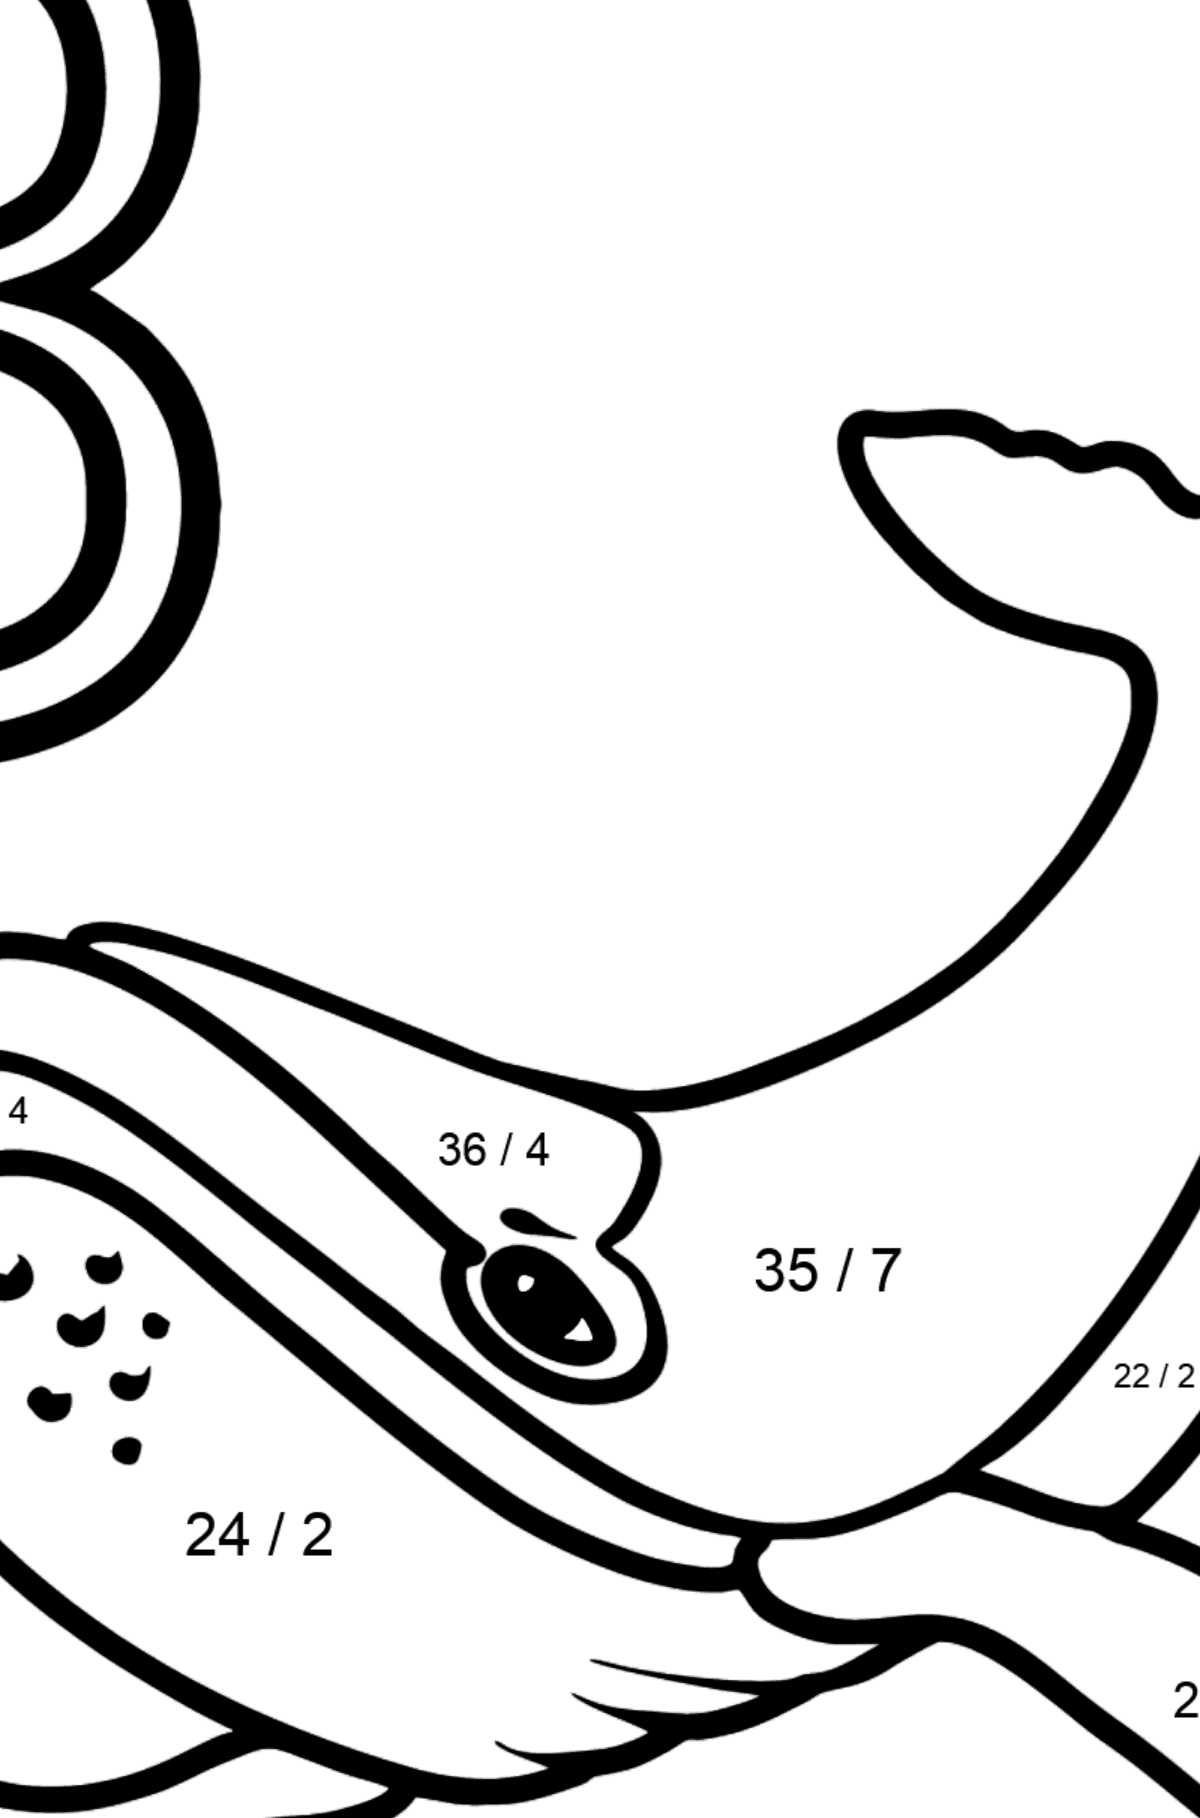 Spanish Letter B coloring pages - BALLENA - Math Coloring - Division for Kids